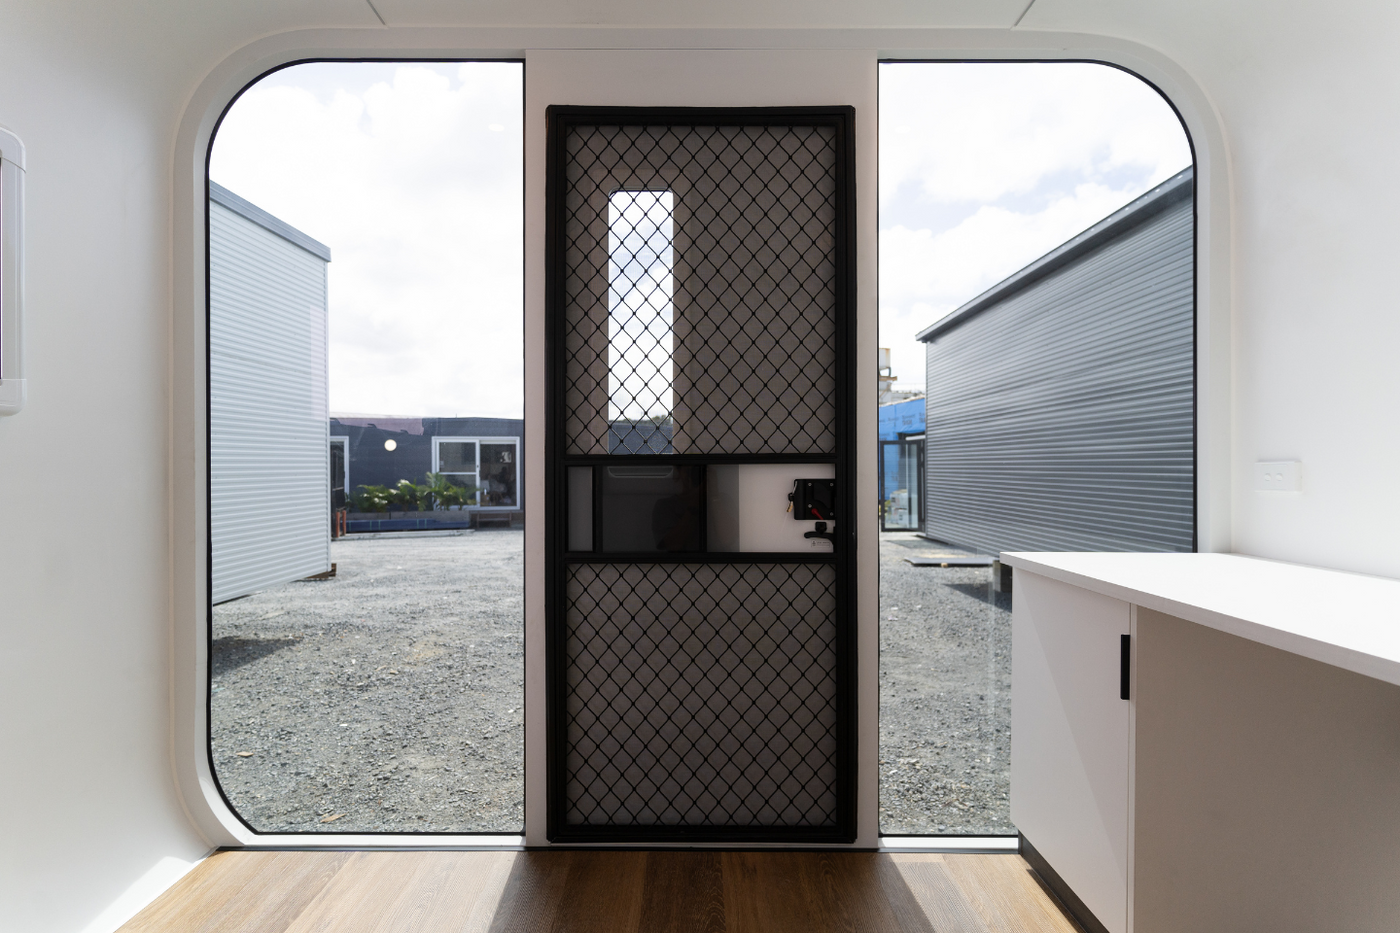 backyard office space with natural light through doors and black-out privacy glass